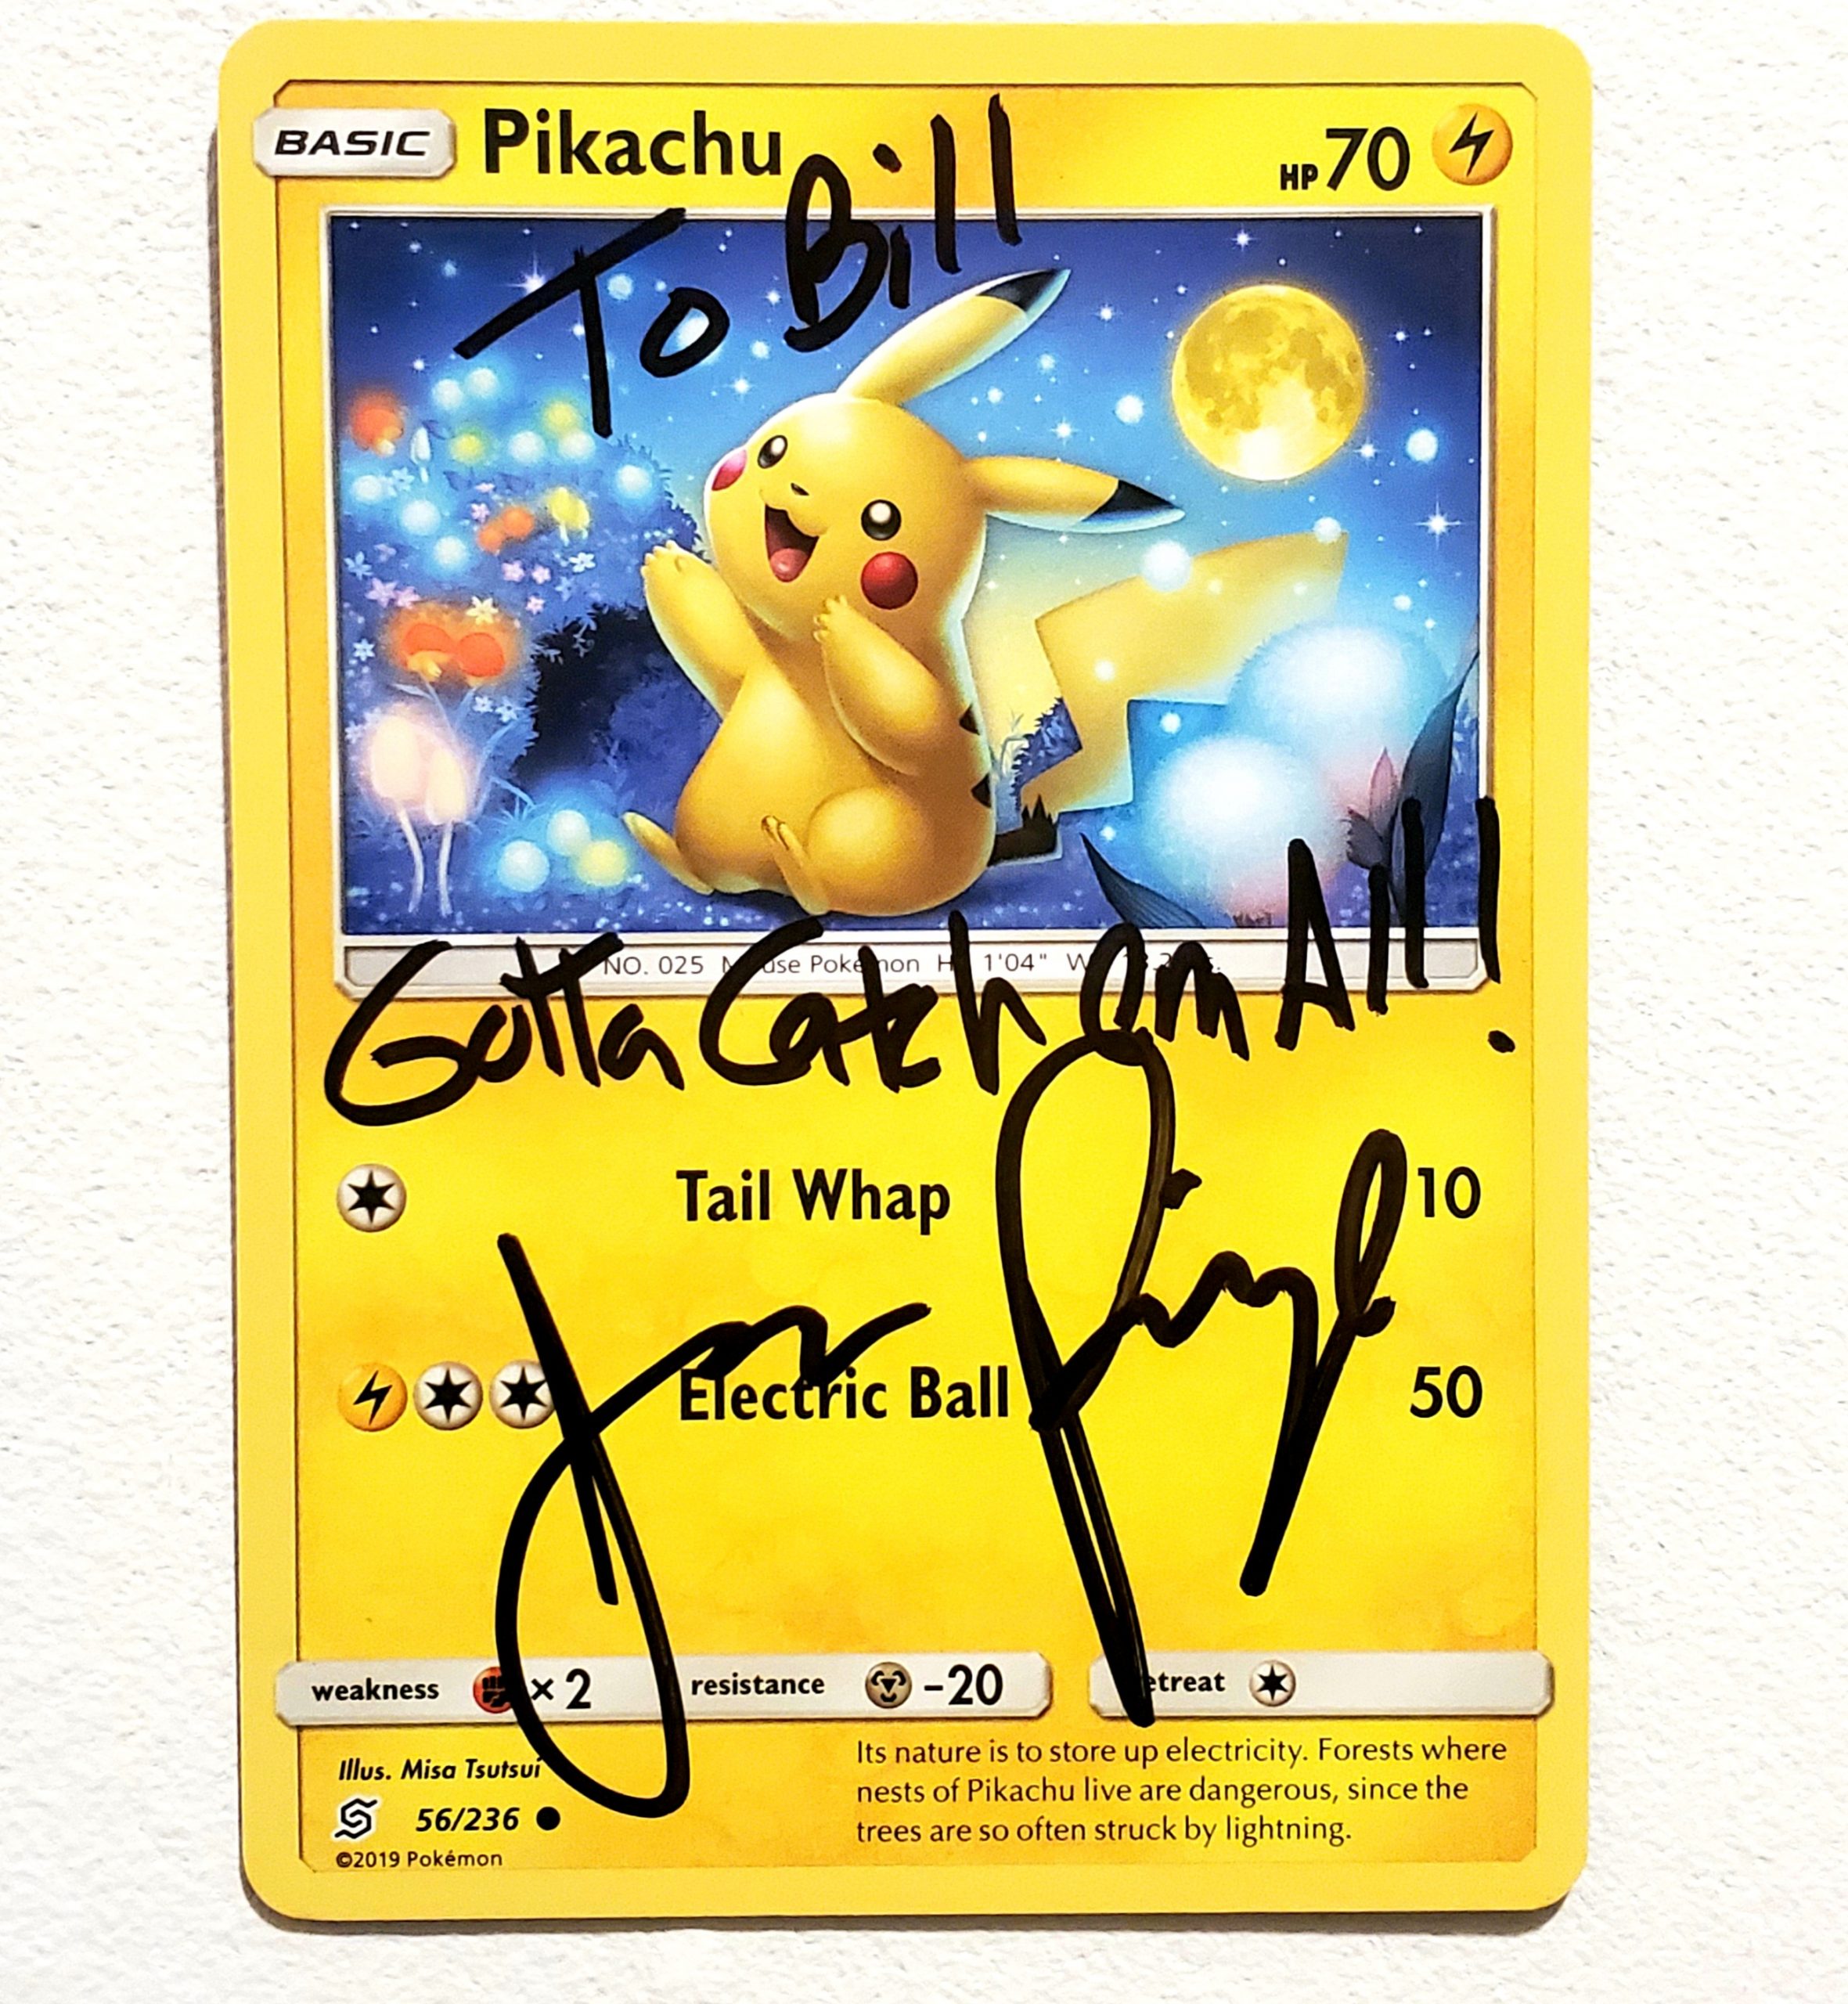 Autographed Pikachu Card 4 Limited Supply